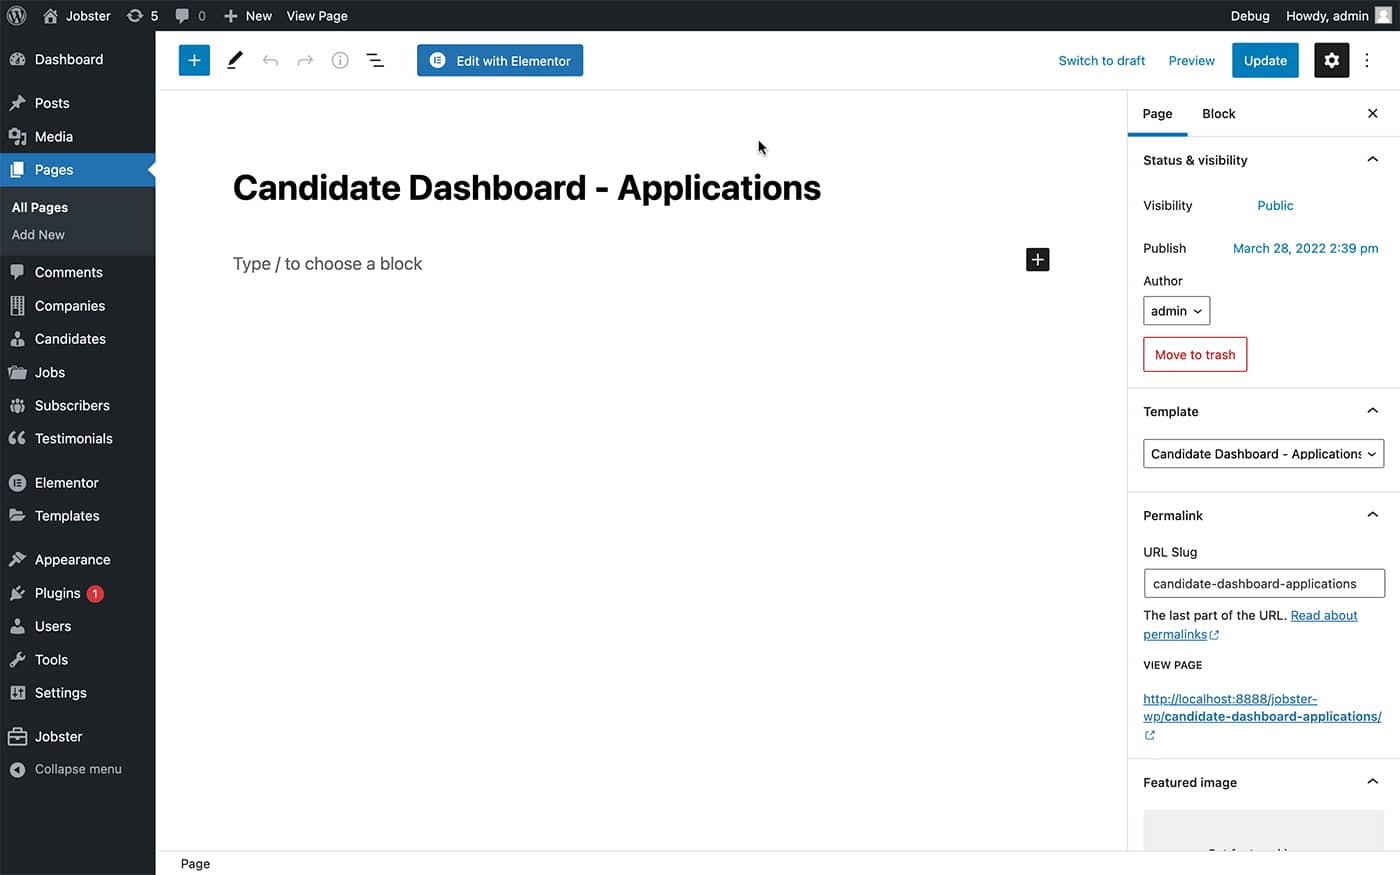 Jobster candidate dashboard applications page template